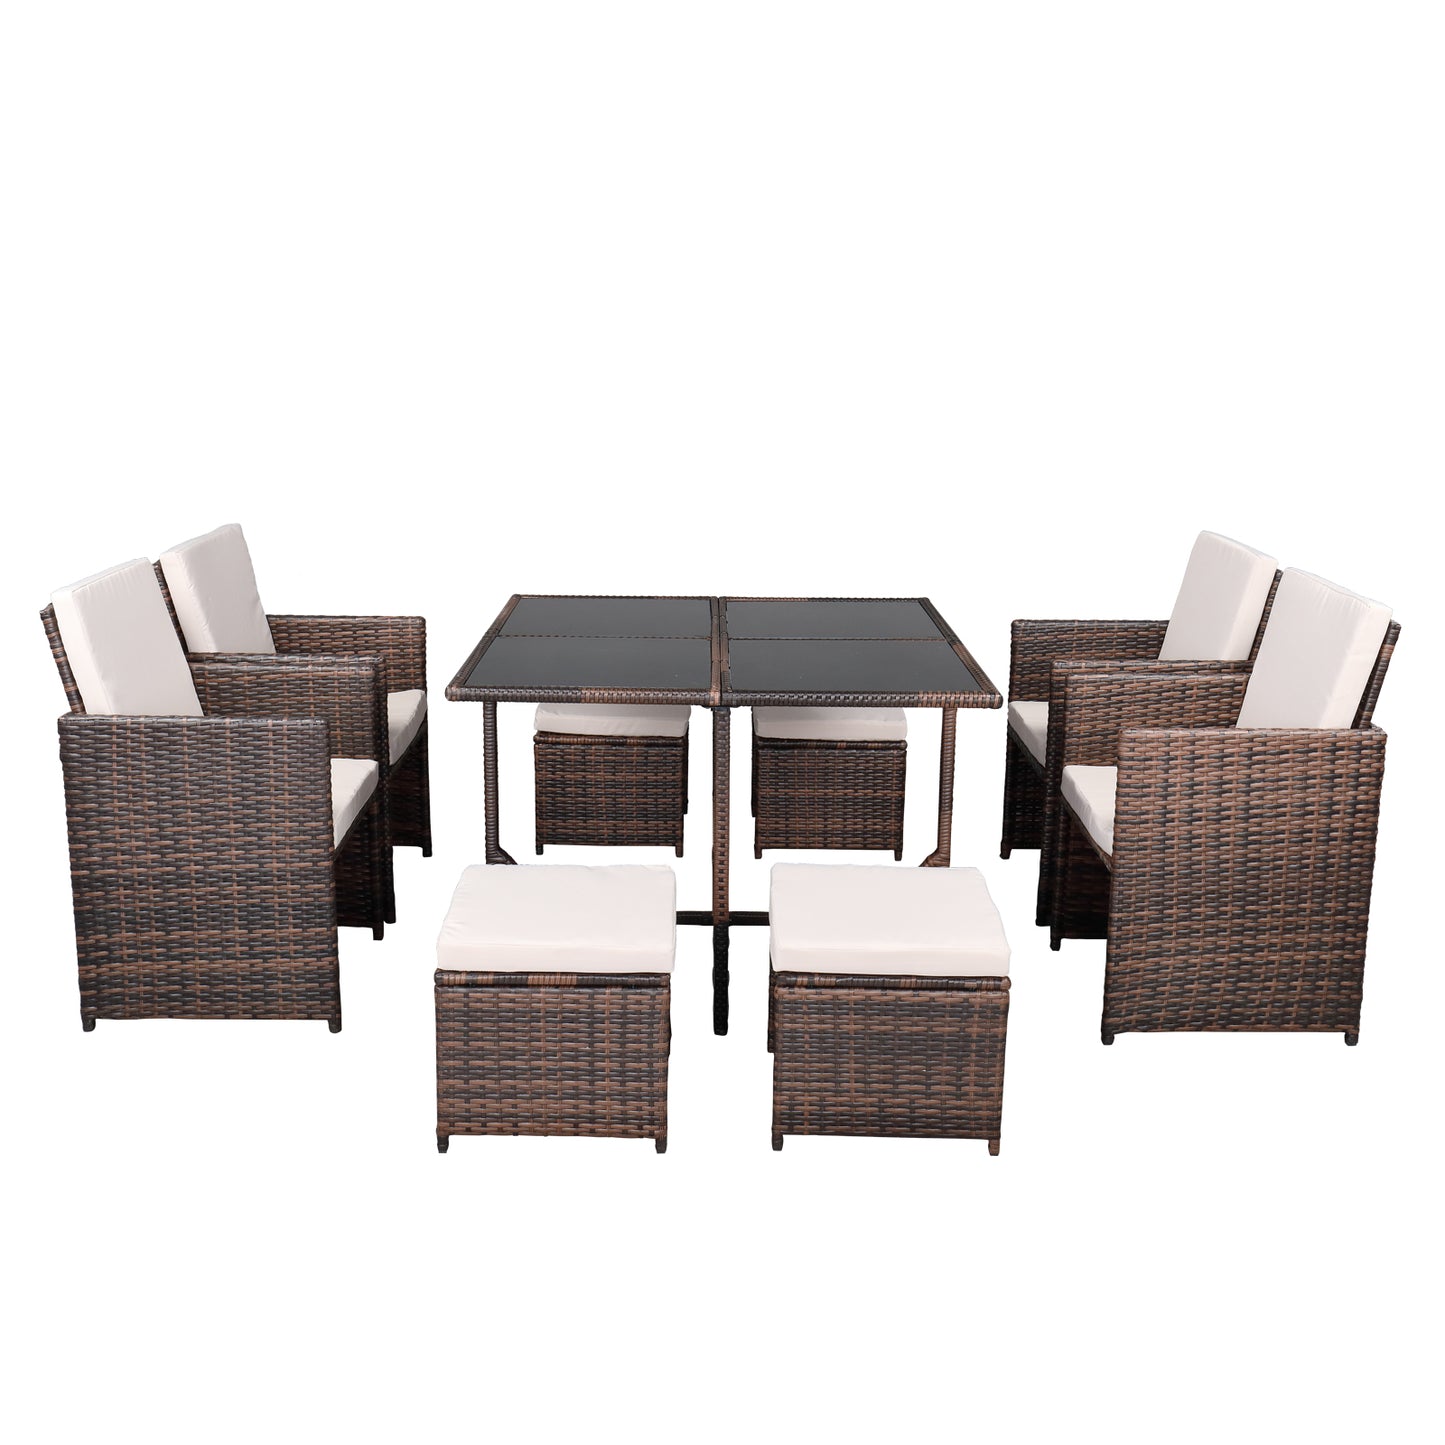 Nine-Piece Table And Chair Set-1 (1/3) Brown Gradient